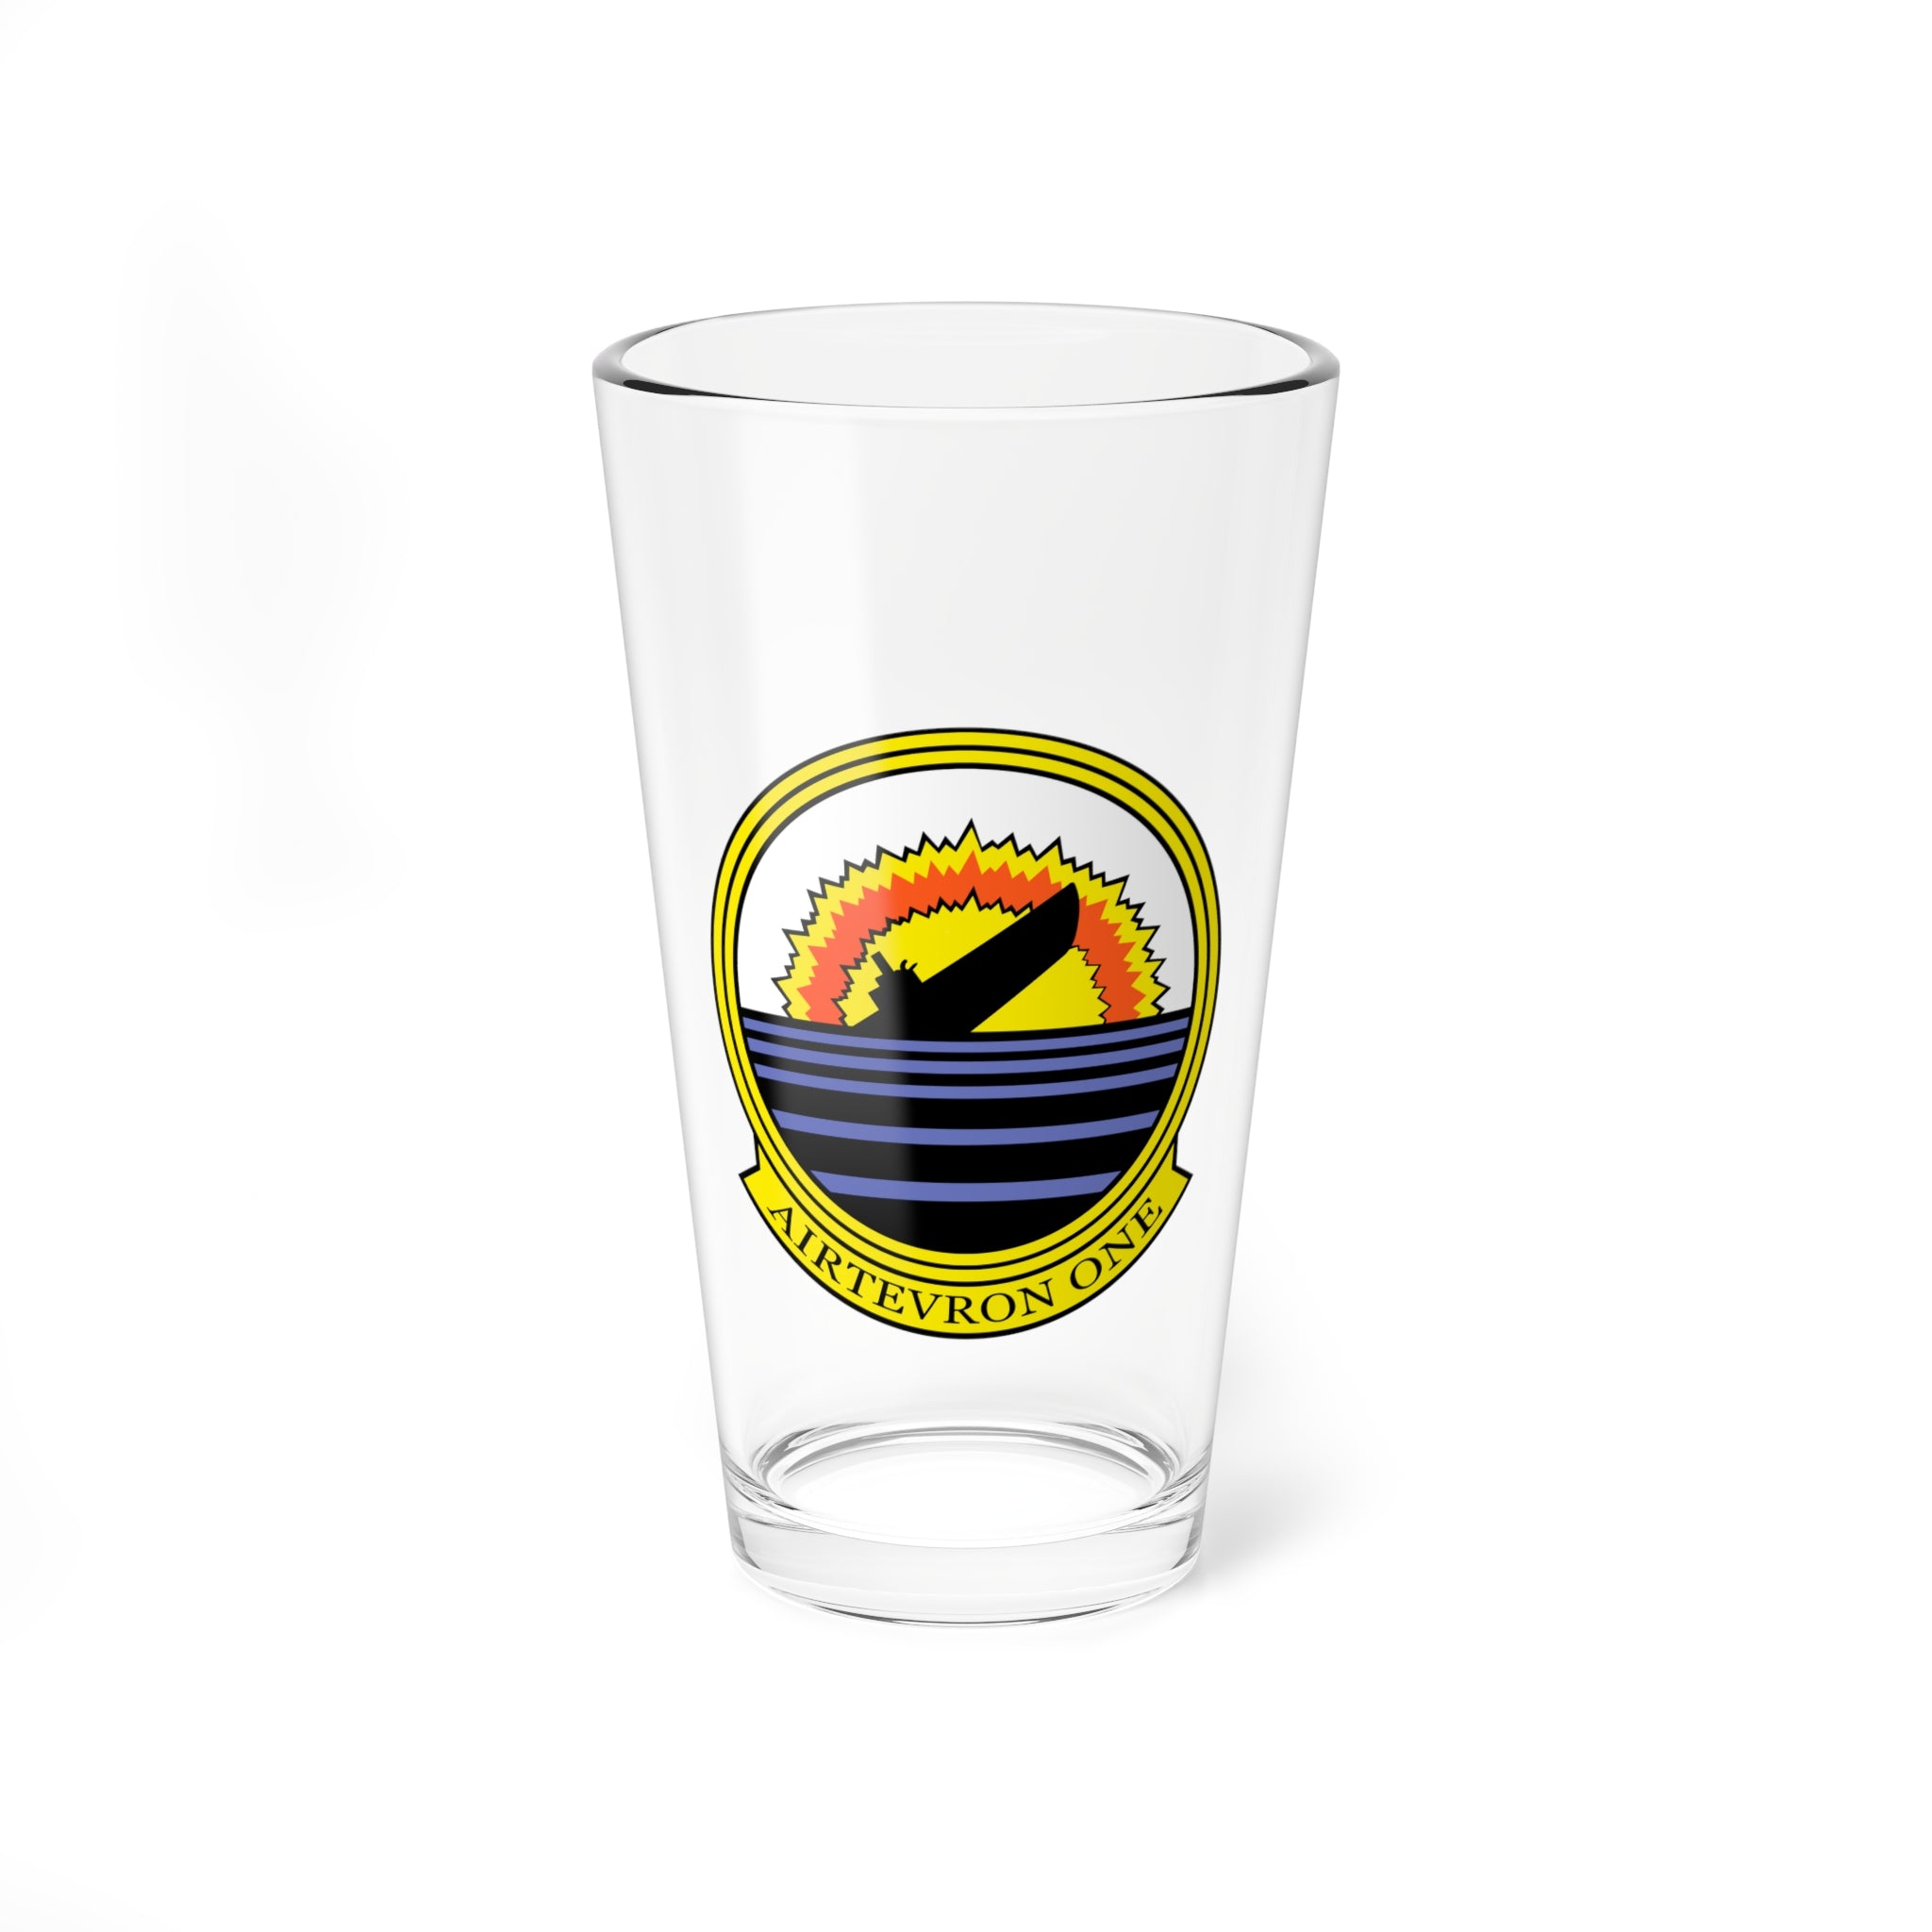 VX-1 "Pioneers" NFO Pint Glass US Navy Test and Evaluation Squadron for retired and veteran Sailors.